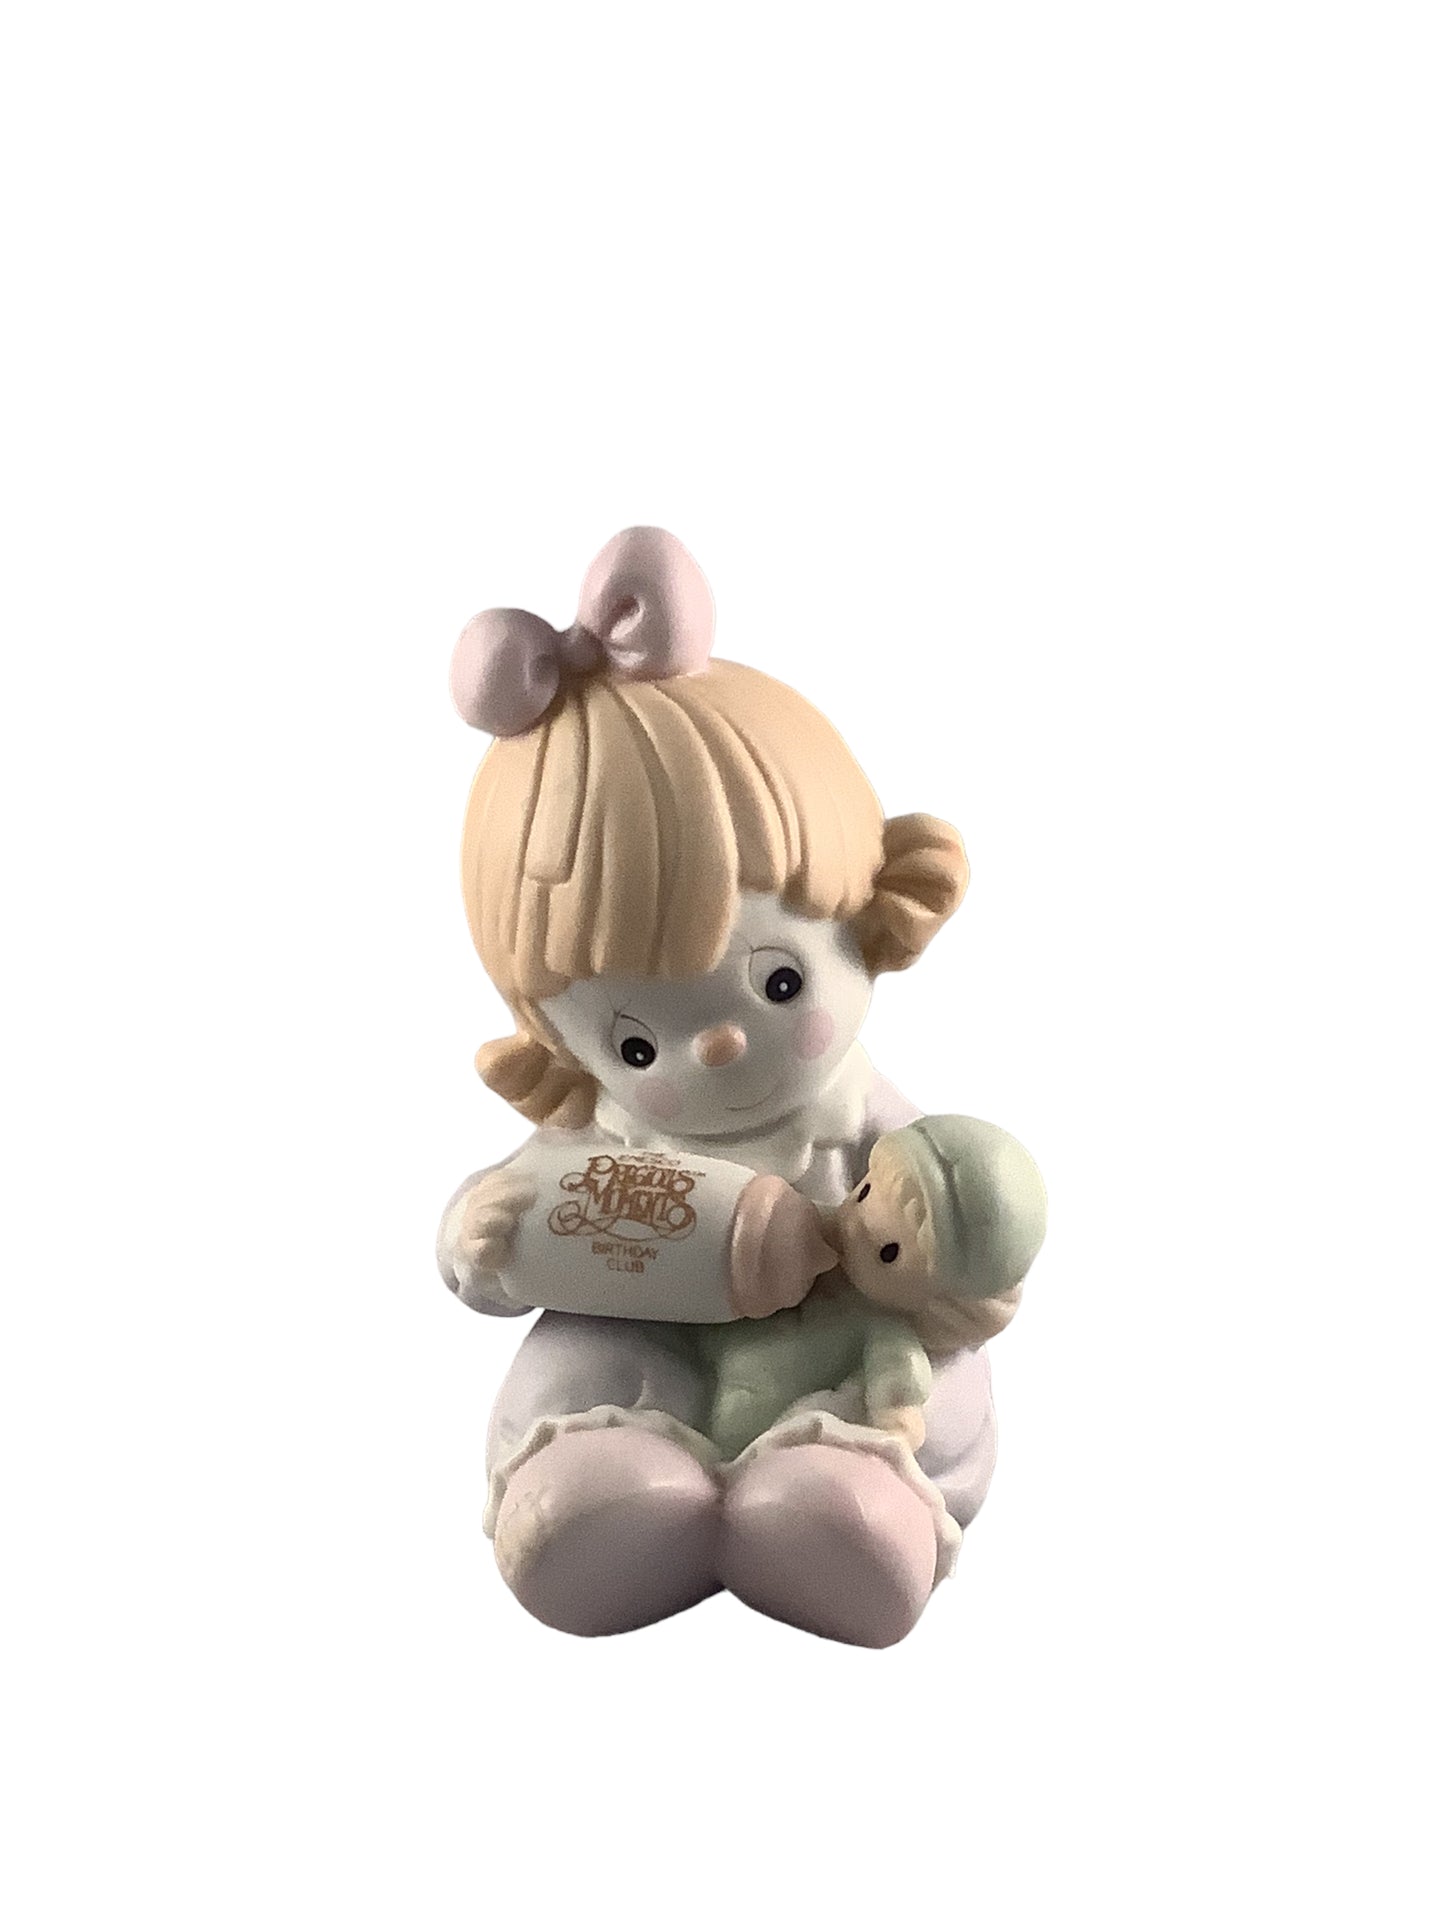 Can't Get Enough Of Our Club - Precious Moment Figurine